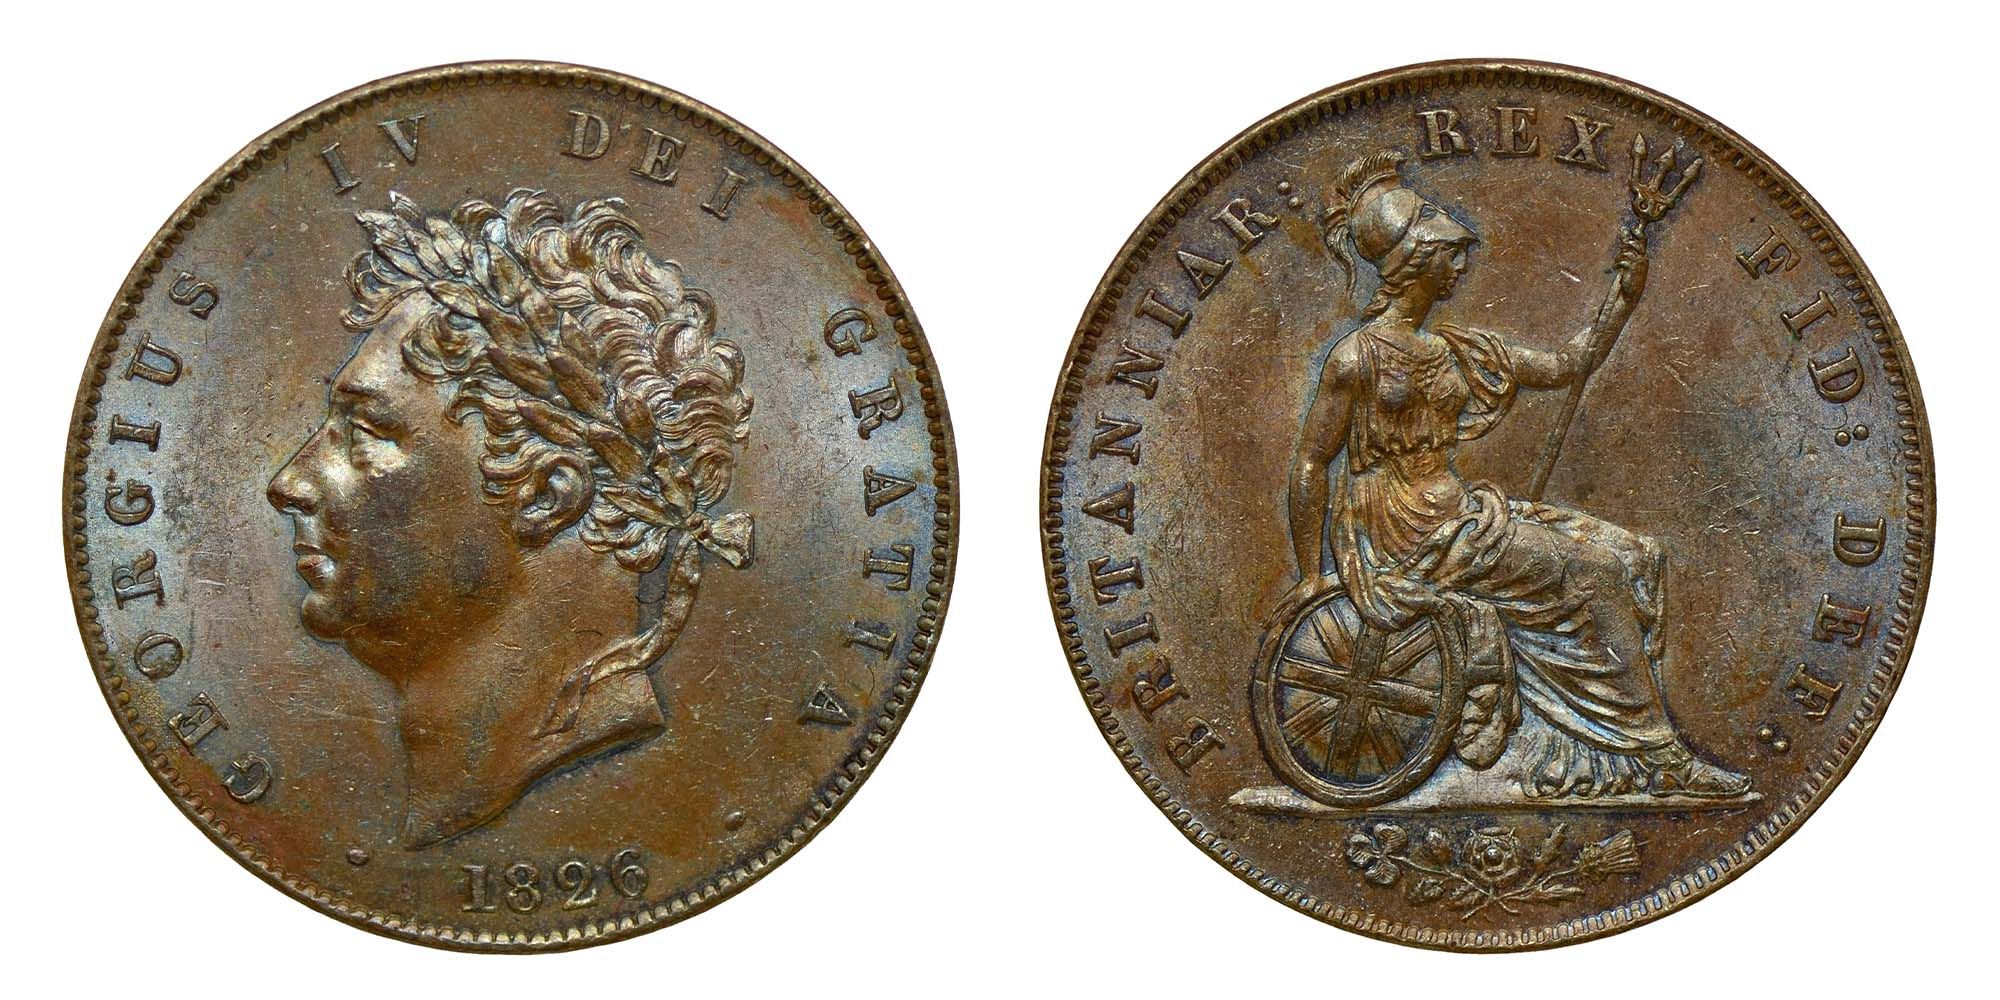 George IV Copper Halfpenny 1826